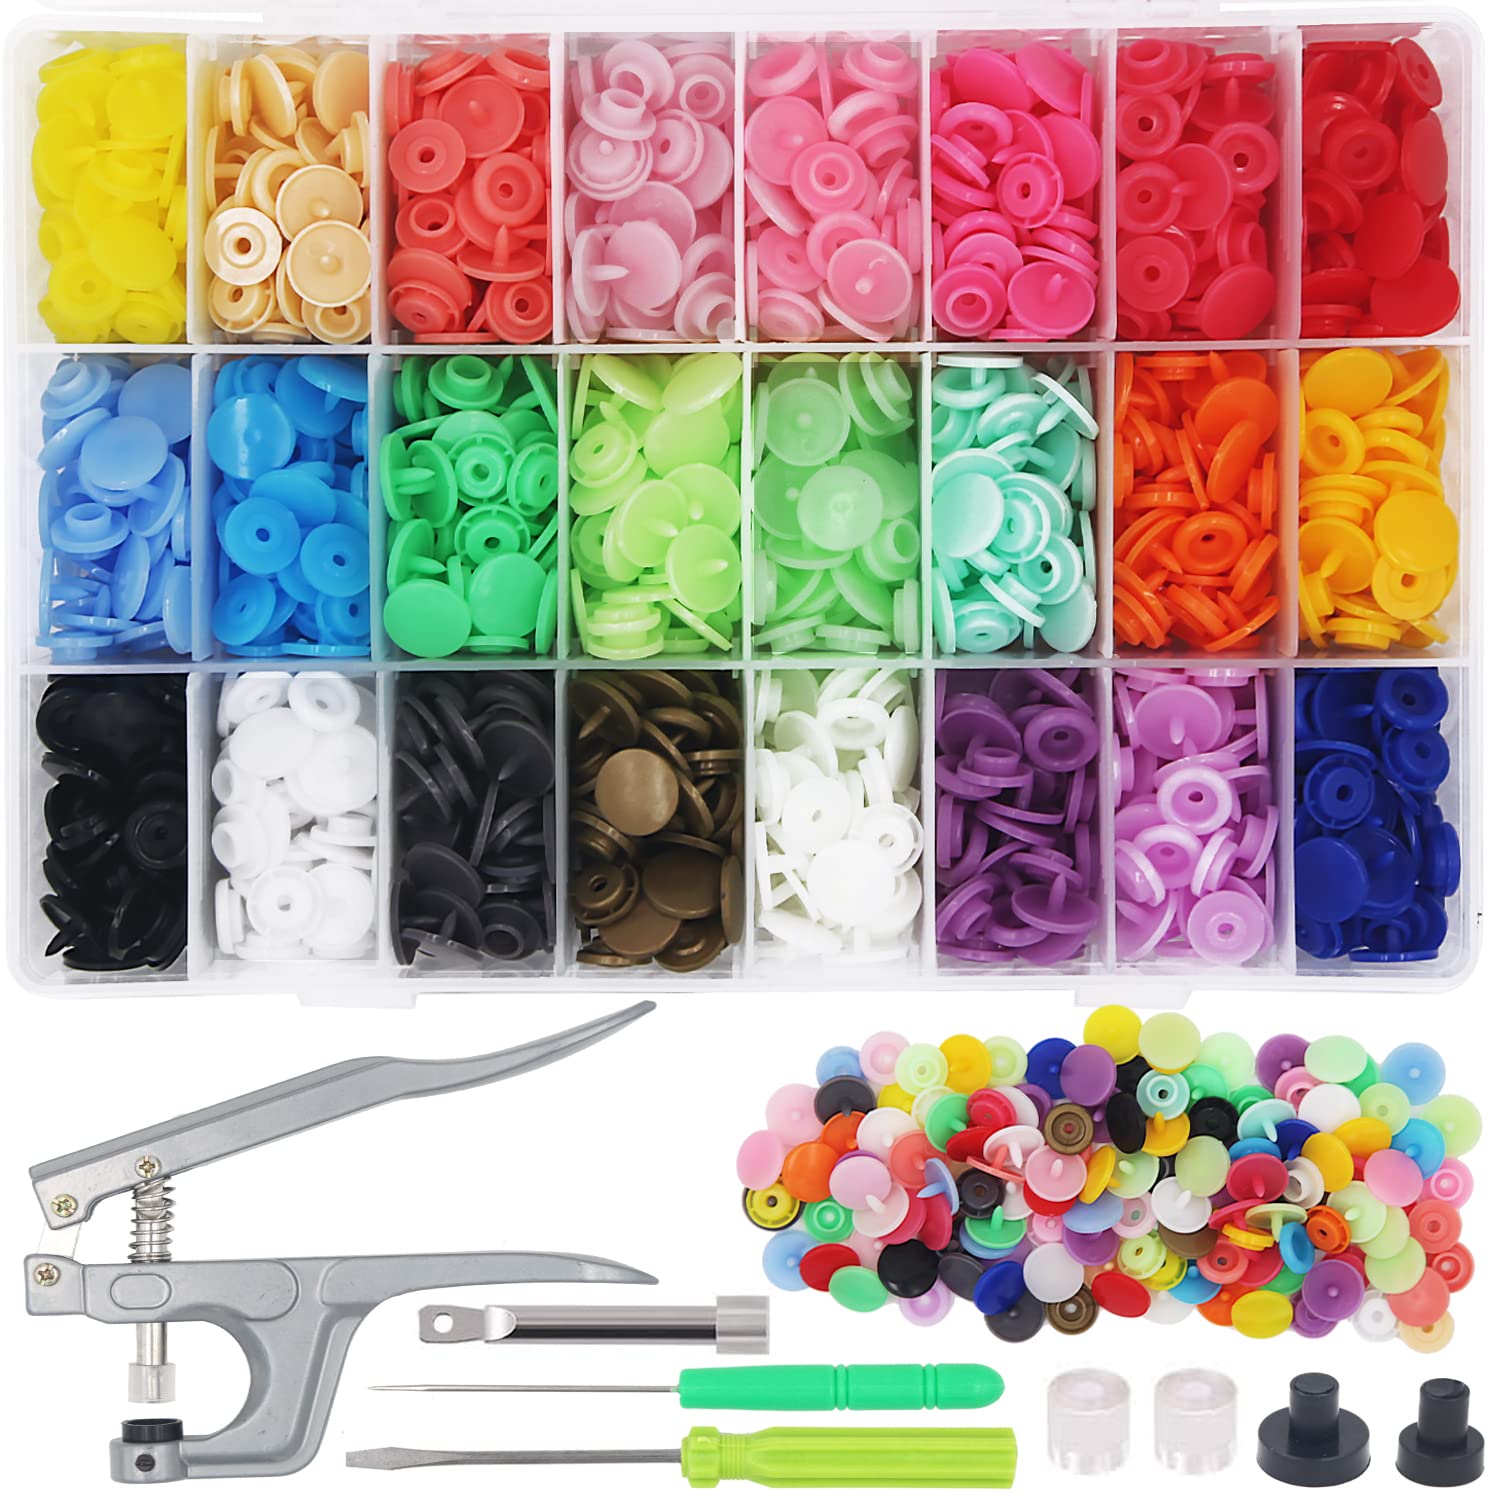 Sew-On Plastic Snap Button Kit, Crafts, Sewing Supplies (15 Colors